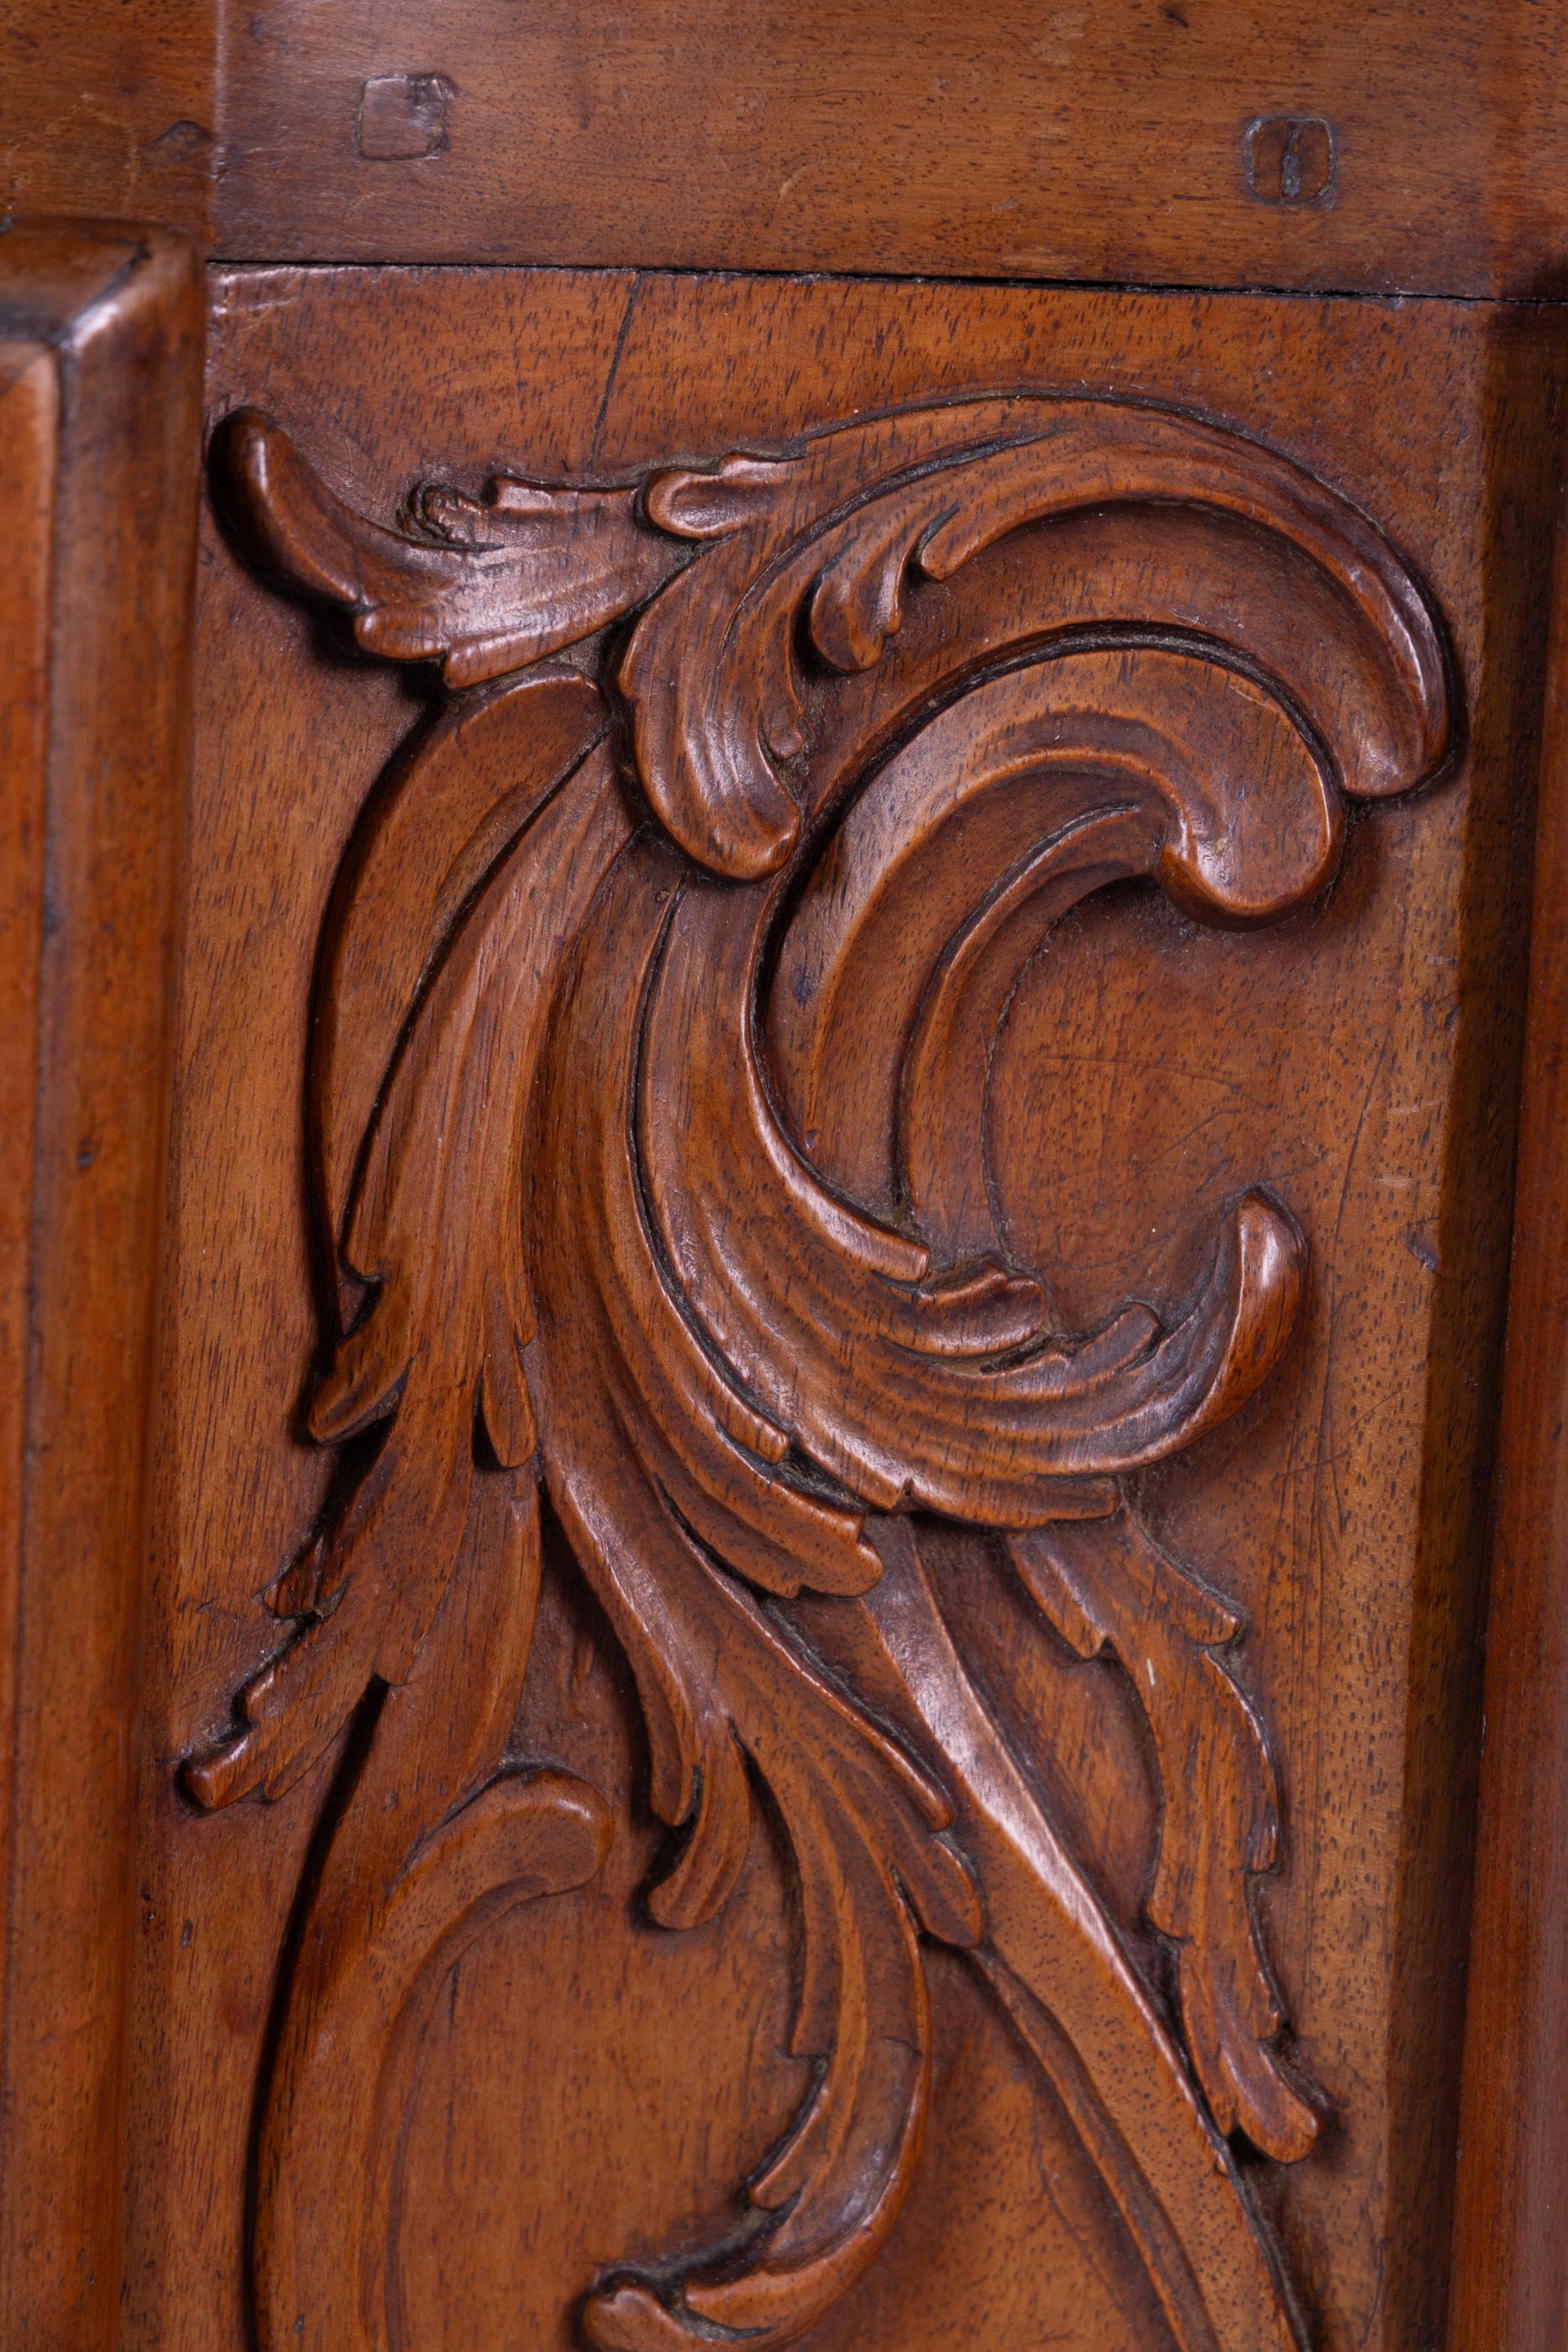 Country French 18th century Lyonnaise carved walnut two door cabinet with original escutcheons, and hinges, adorned with heavy open work carving coming down from center to the apron, and on the legs with scroll feet. The cabinet has a contoured